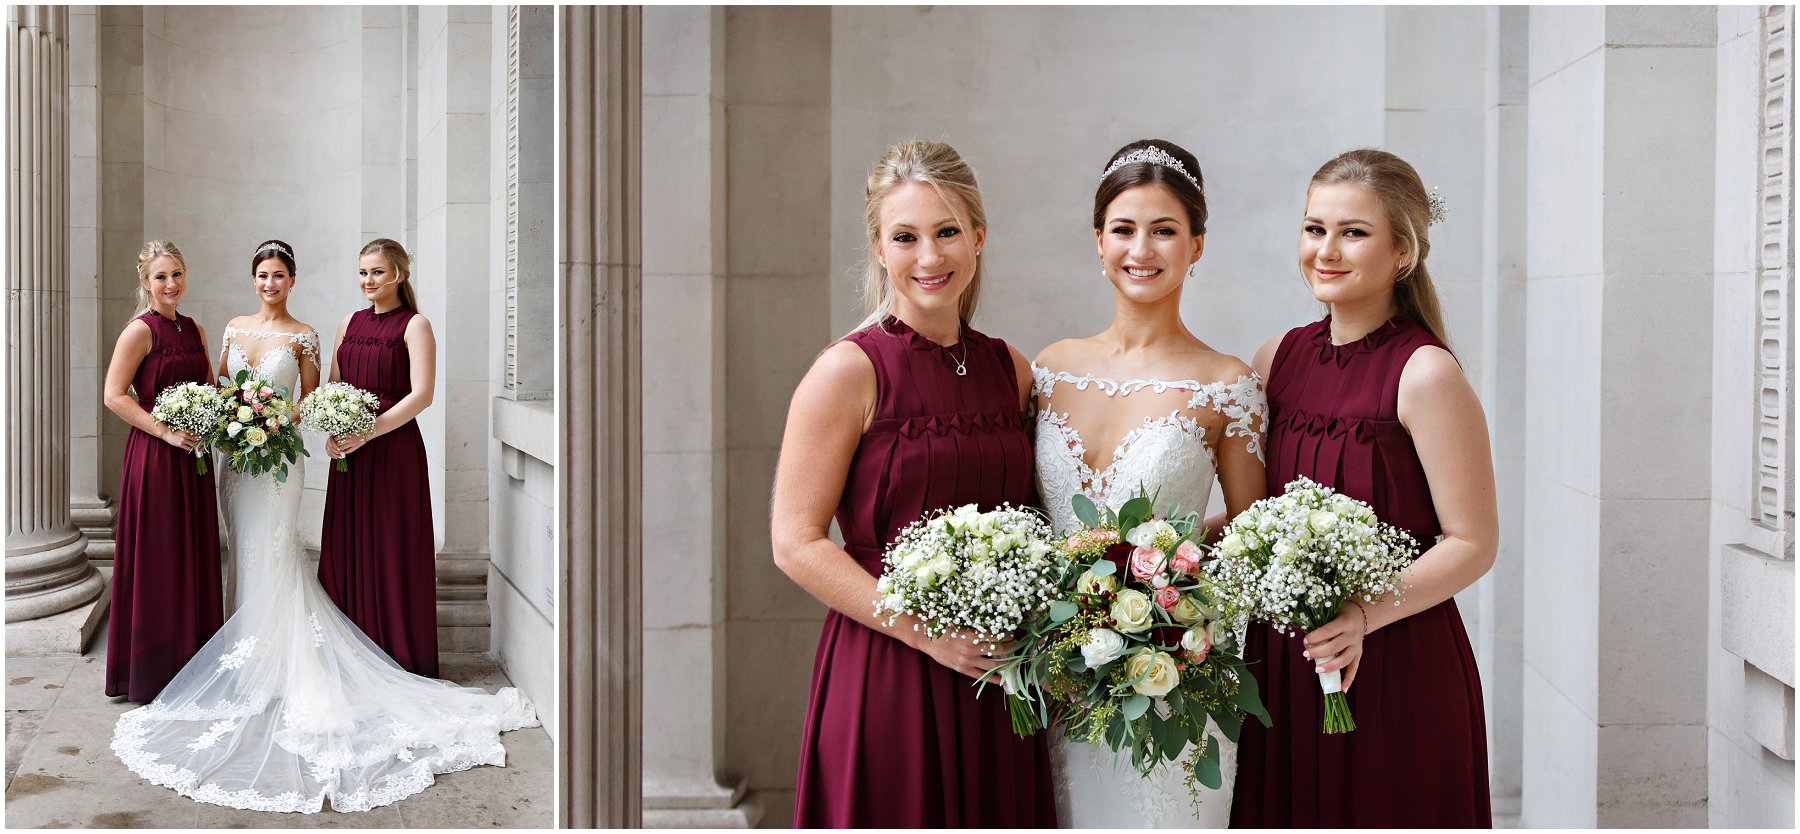 The beautiful bride poses for portraits with her bridesmaids by YBPHOTOGRAPHIC